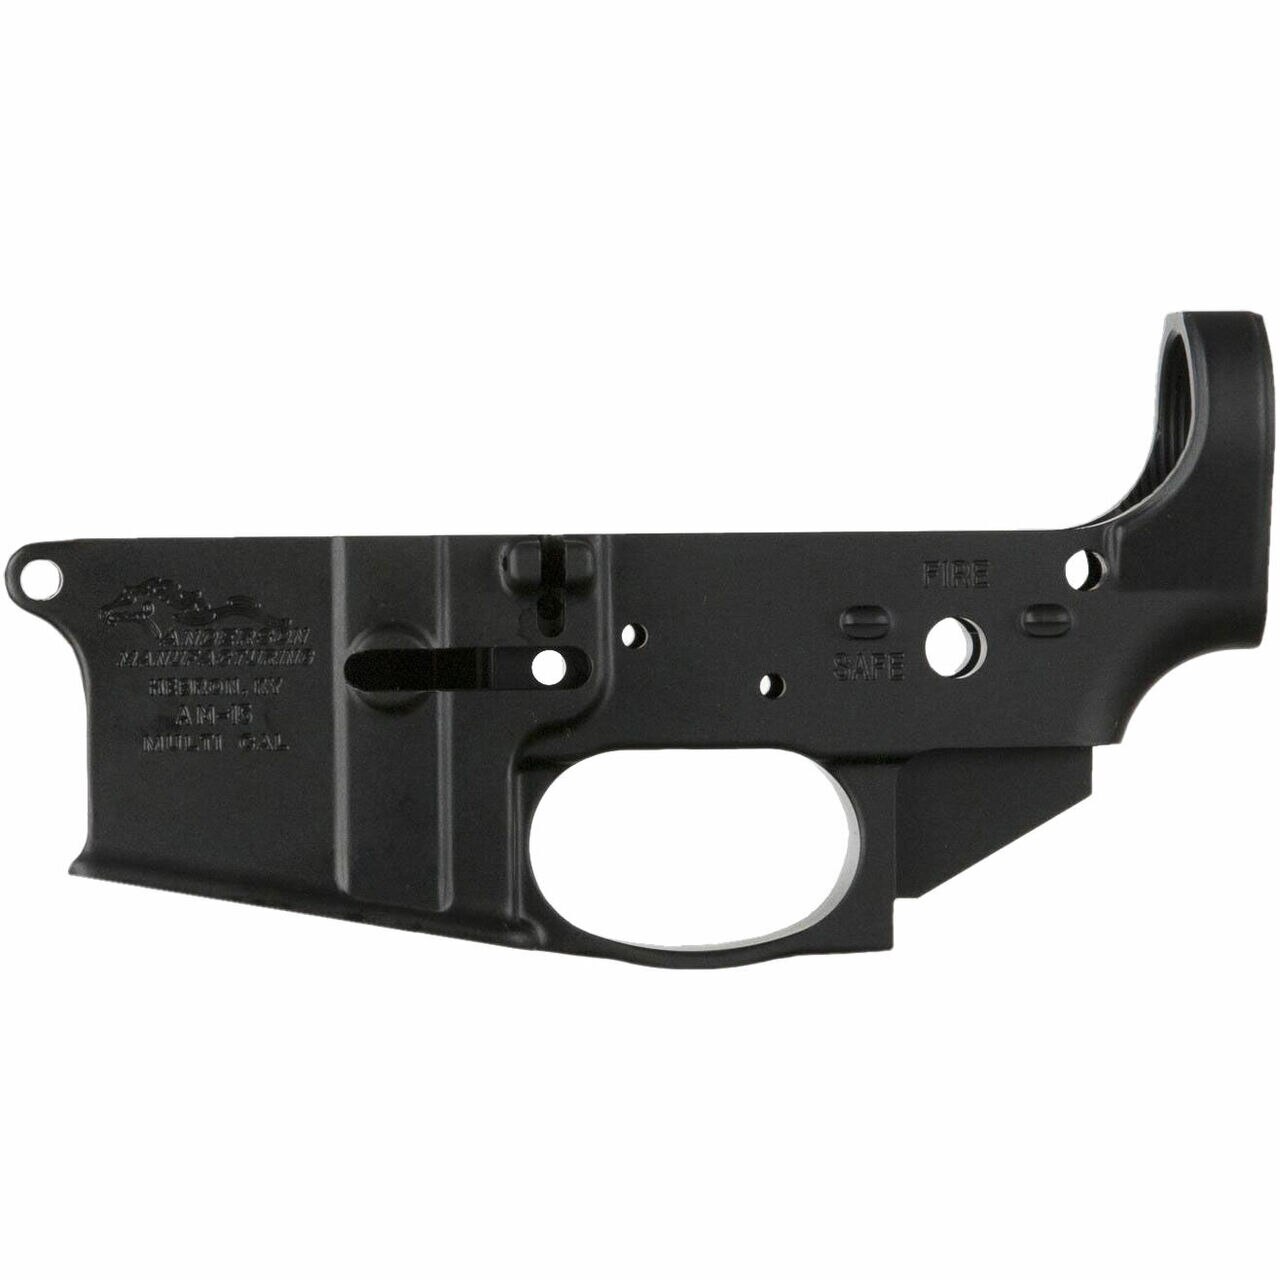 Image of Anderson AR-15 Stripped Lower Receiver Multi-Caliber, Black Hardcoat, Closed Trigger, Packaged